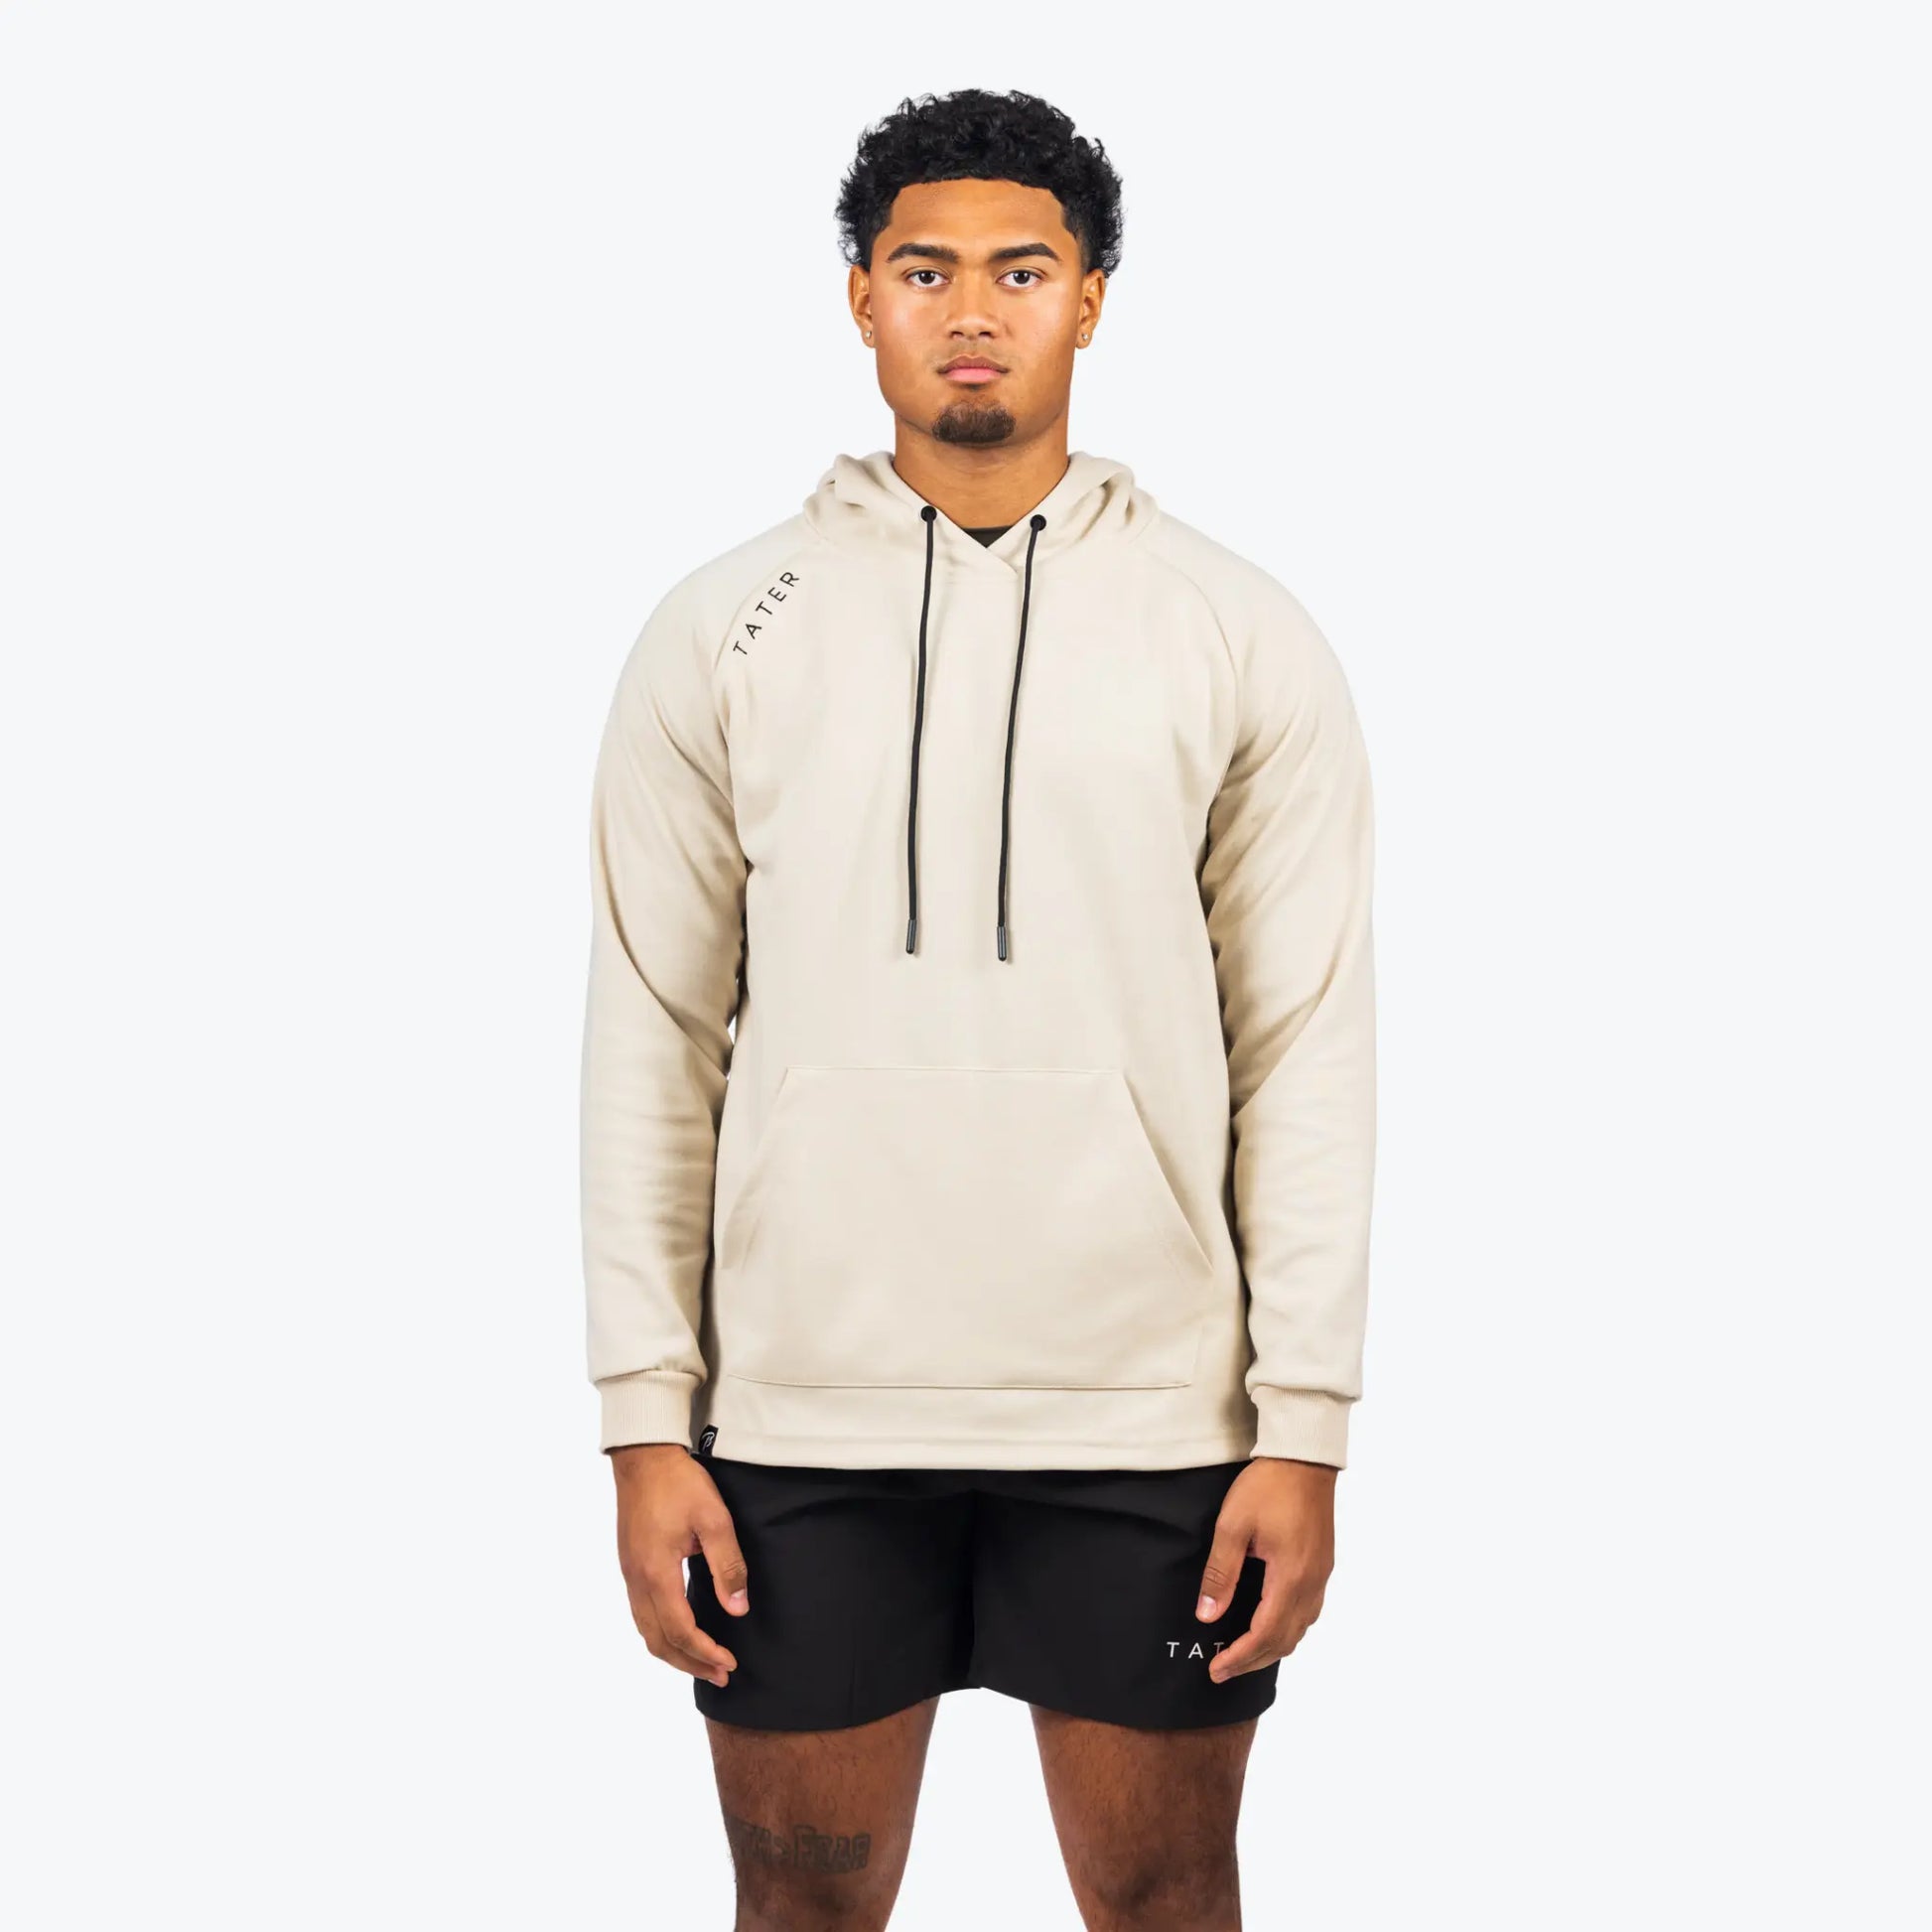 The uploaded image shows a model wearing a cream-colored professional baseball training hoodie with long sleeves, paired with black shorts, both adorned with the "TATER" logo. The hoodie, which is suitable for both sports training and casual wear, features a drawstring hood and a central front pocket. The style is modern and understated, emphasizing a practical and athletic lifestyle.